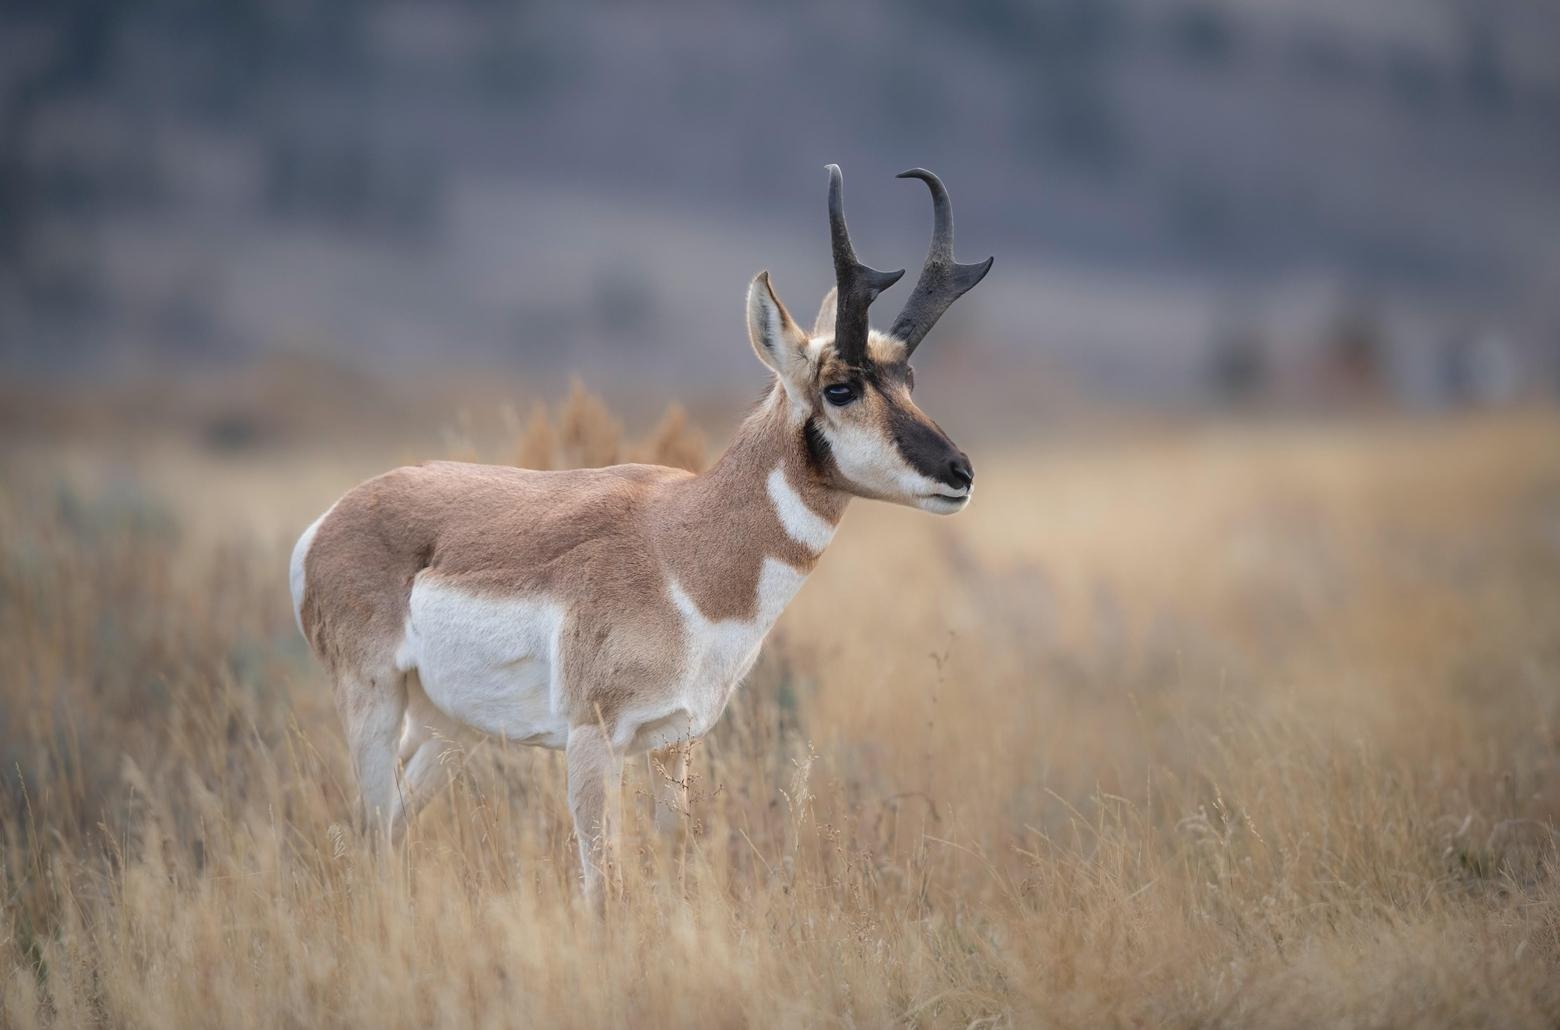 The 640-acre Kelly parcel in Grand Teton National Park is home to elk, mule deer and bison, and is on the famous Path of the Pronghorn. It could go to the highest bidder tomorrow, Dec. 7. Photo courtesy Savannah Rose